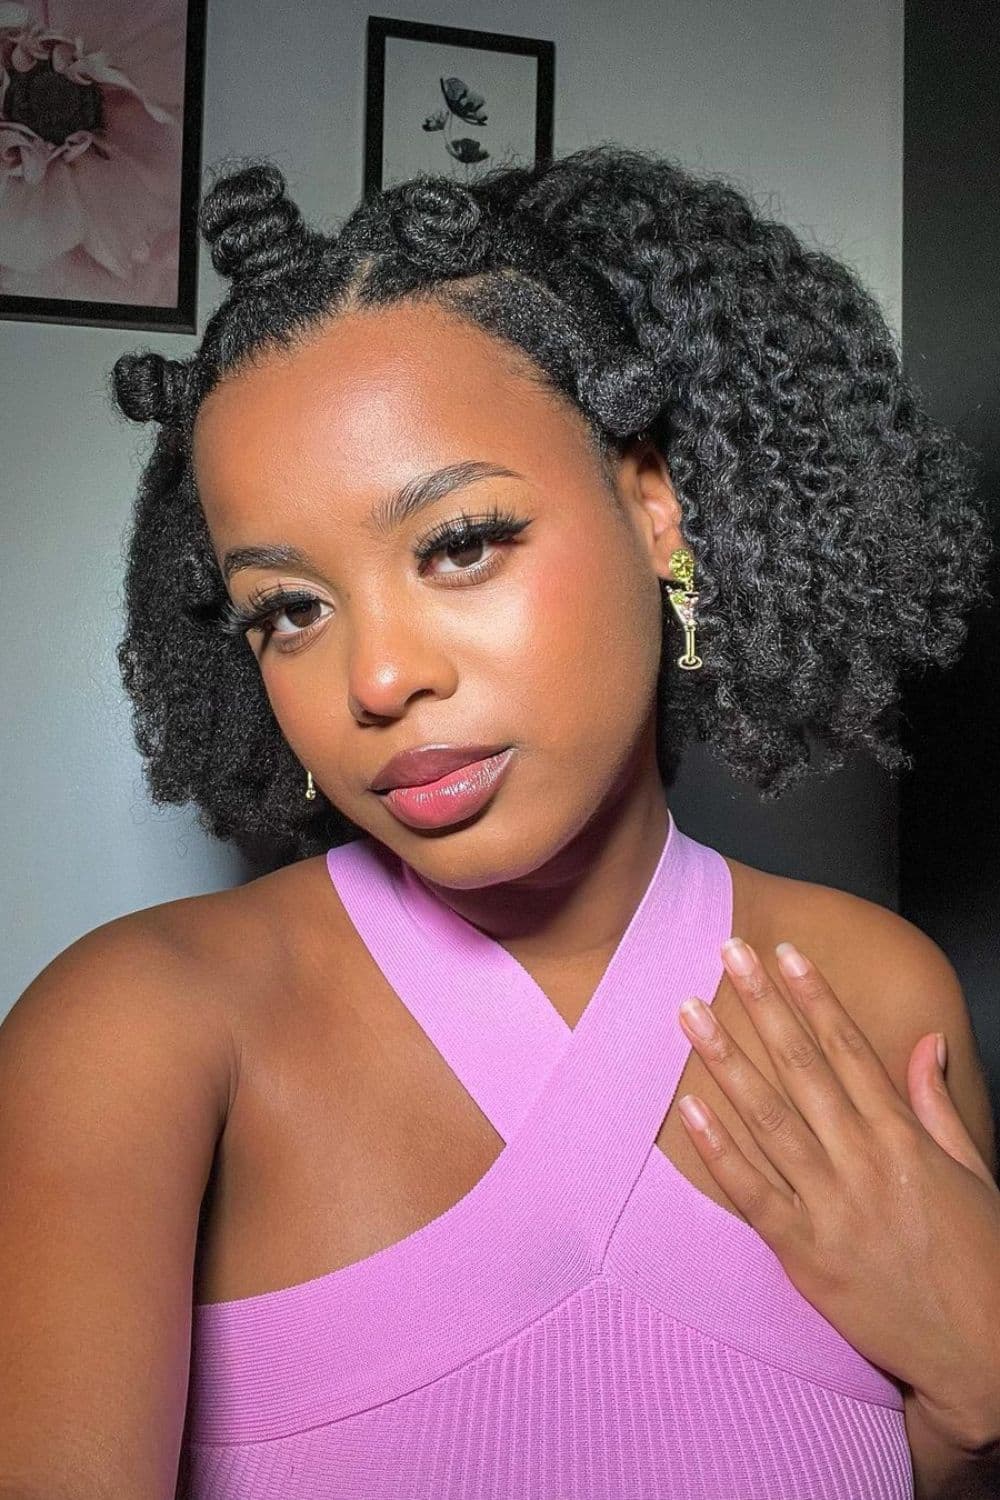 A black woman in a pink halter top with a Bantu knot crown.